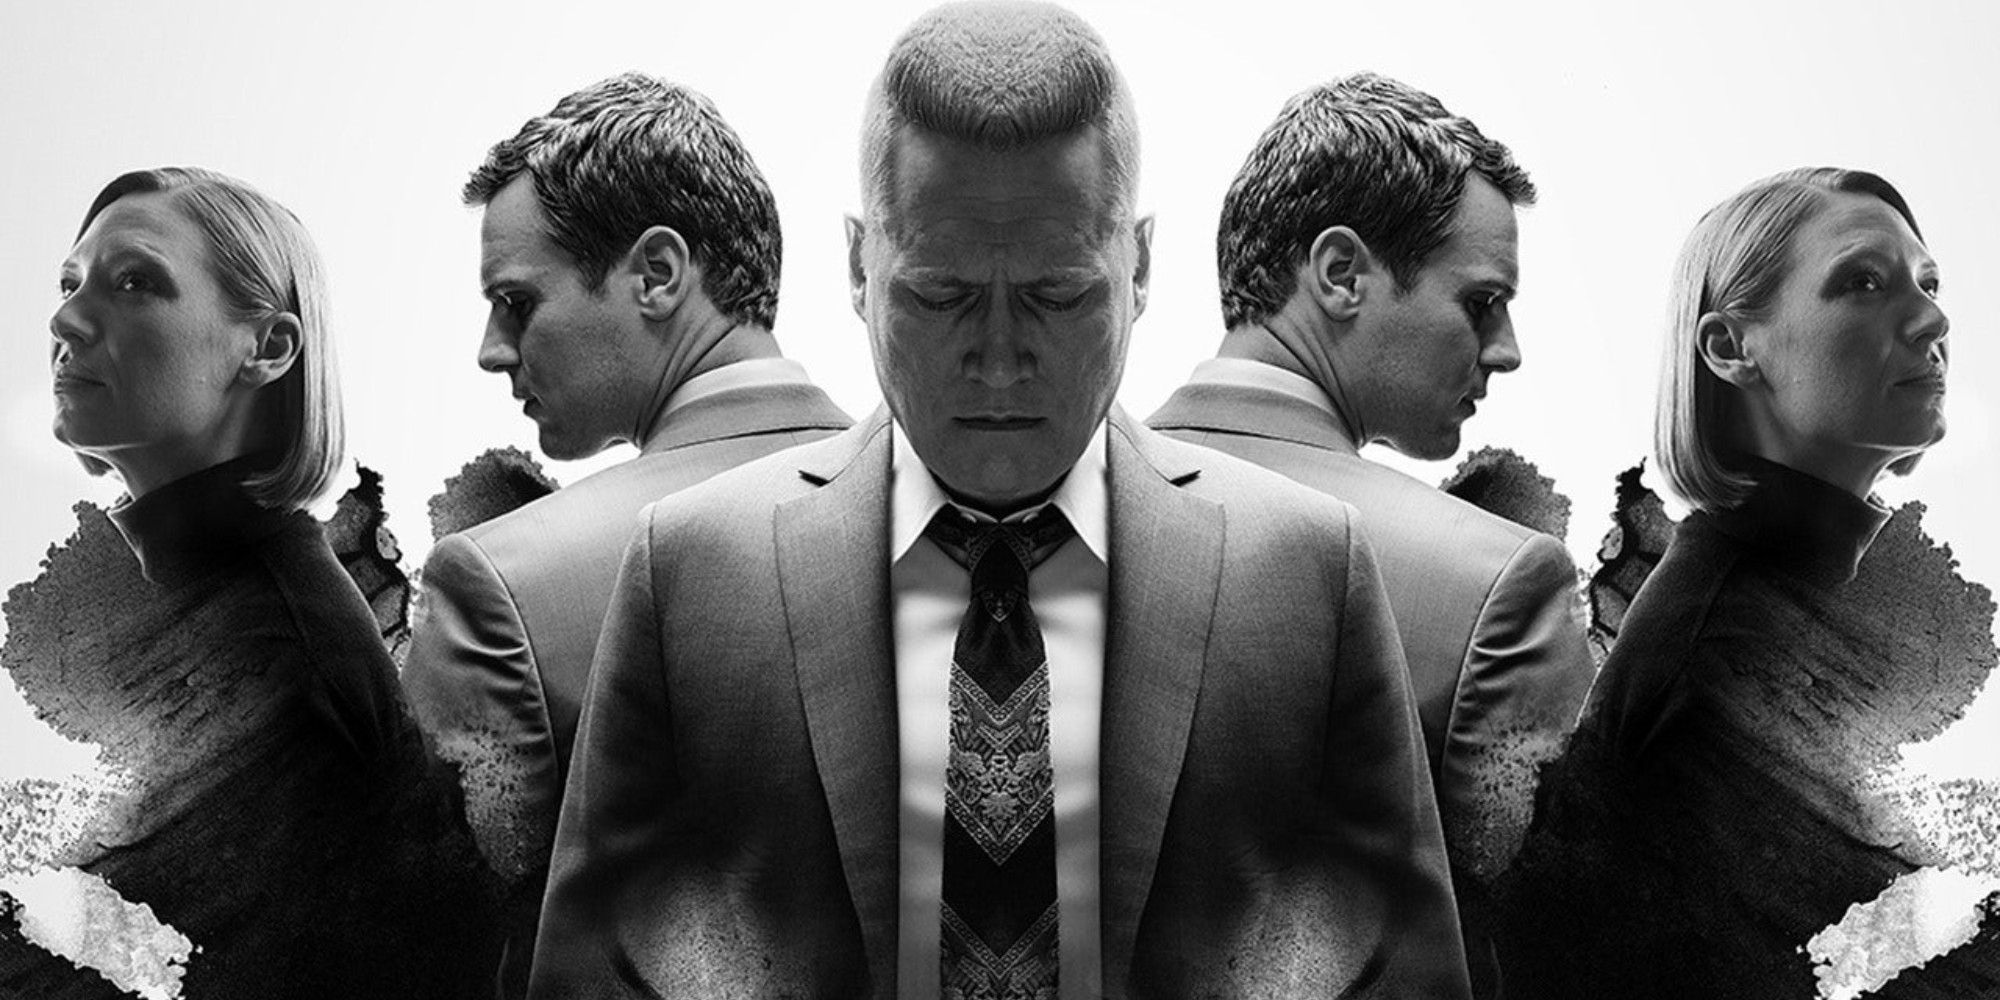 Jonathan Gross, Holt McCallany and Anna Torv stand together for a Netflix Mindhunter poster.